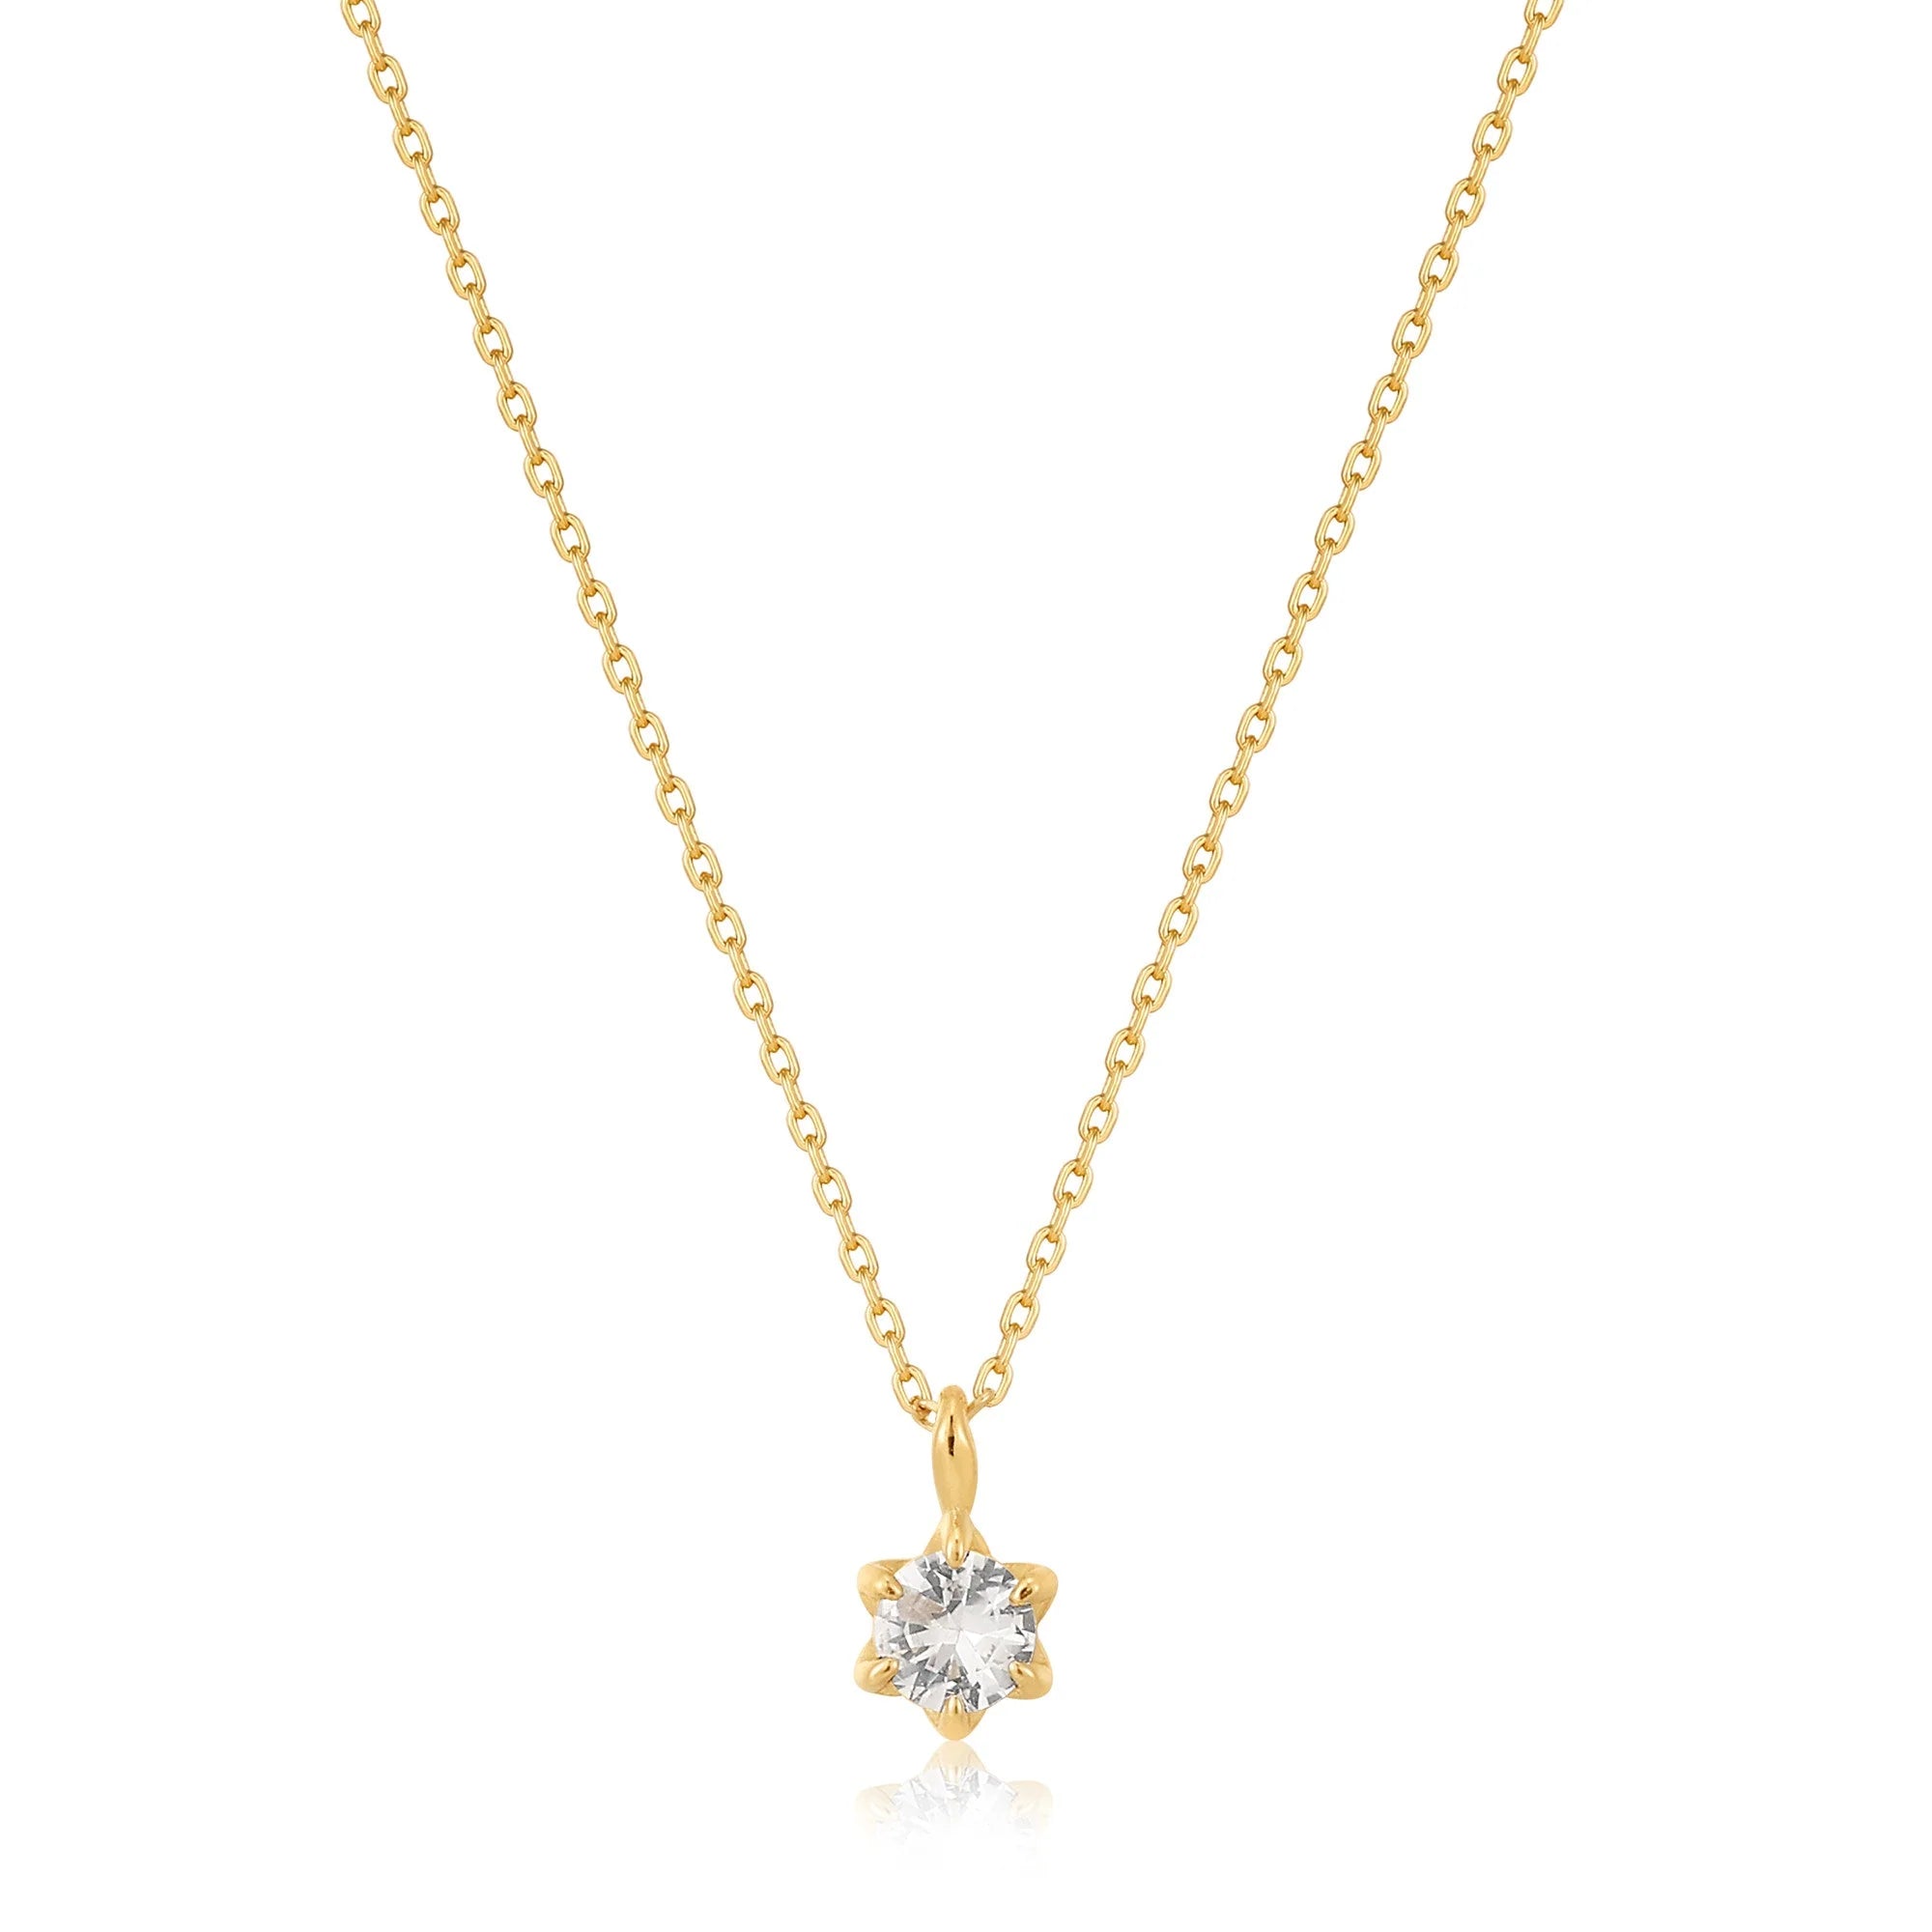 Ania Haie 14kt Gold White Sapphire Pendant Necklace